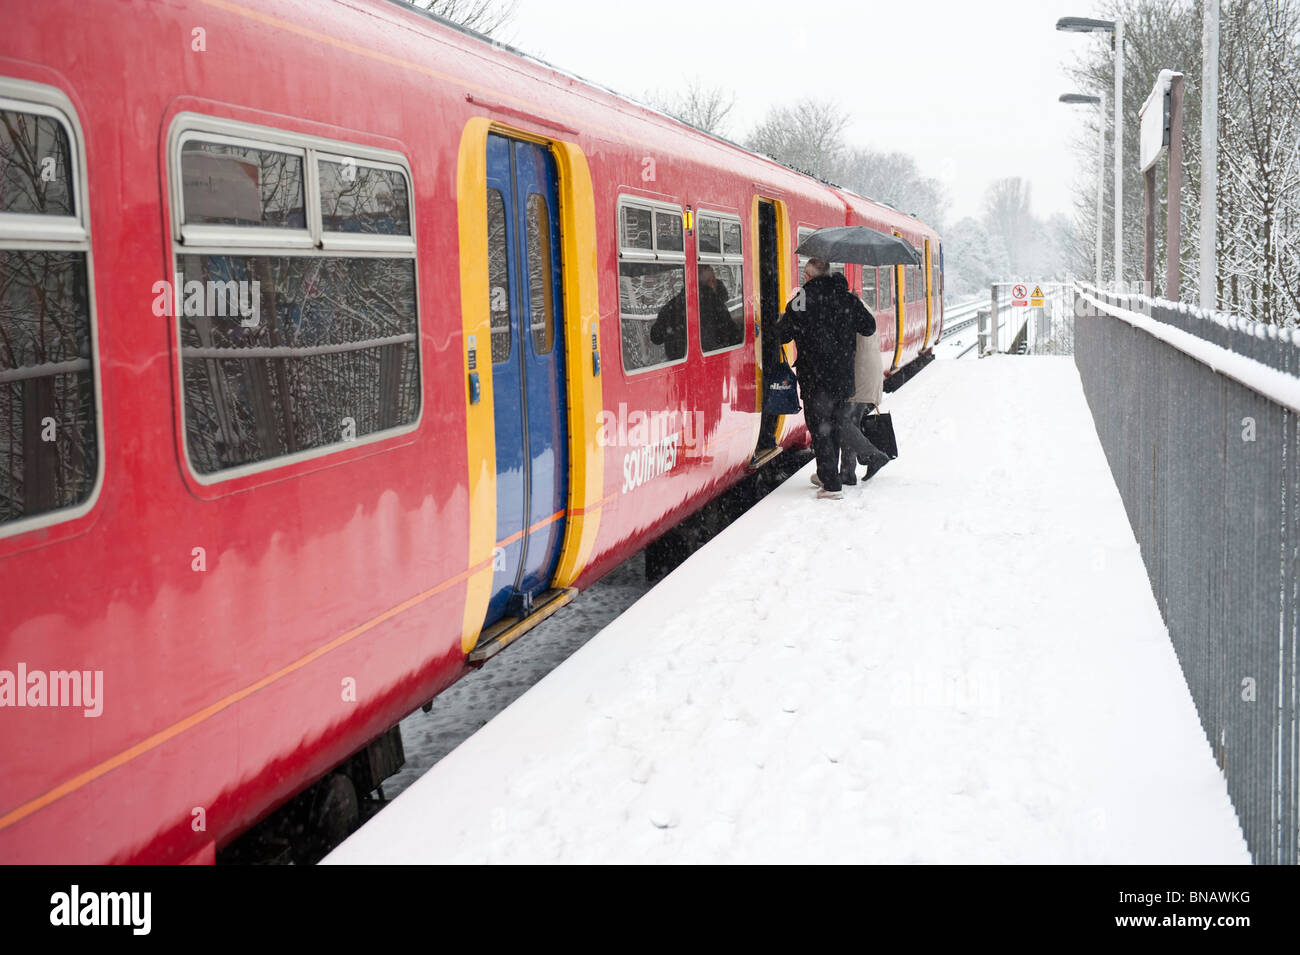 Two people boarding a  South West train  at station on a snowy day Stock Photo